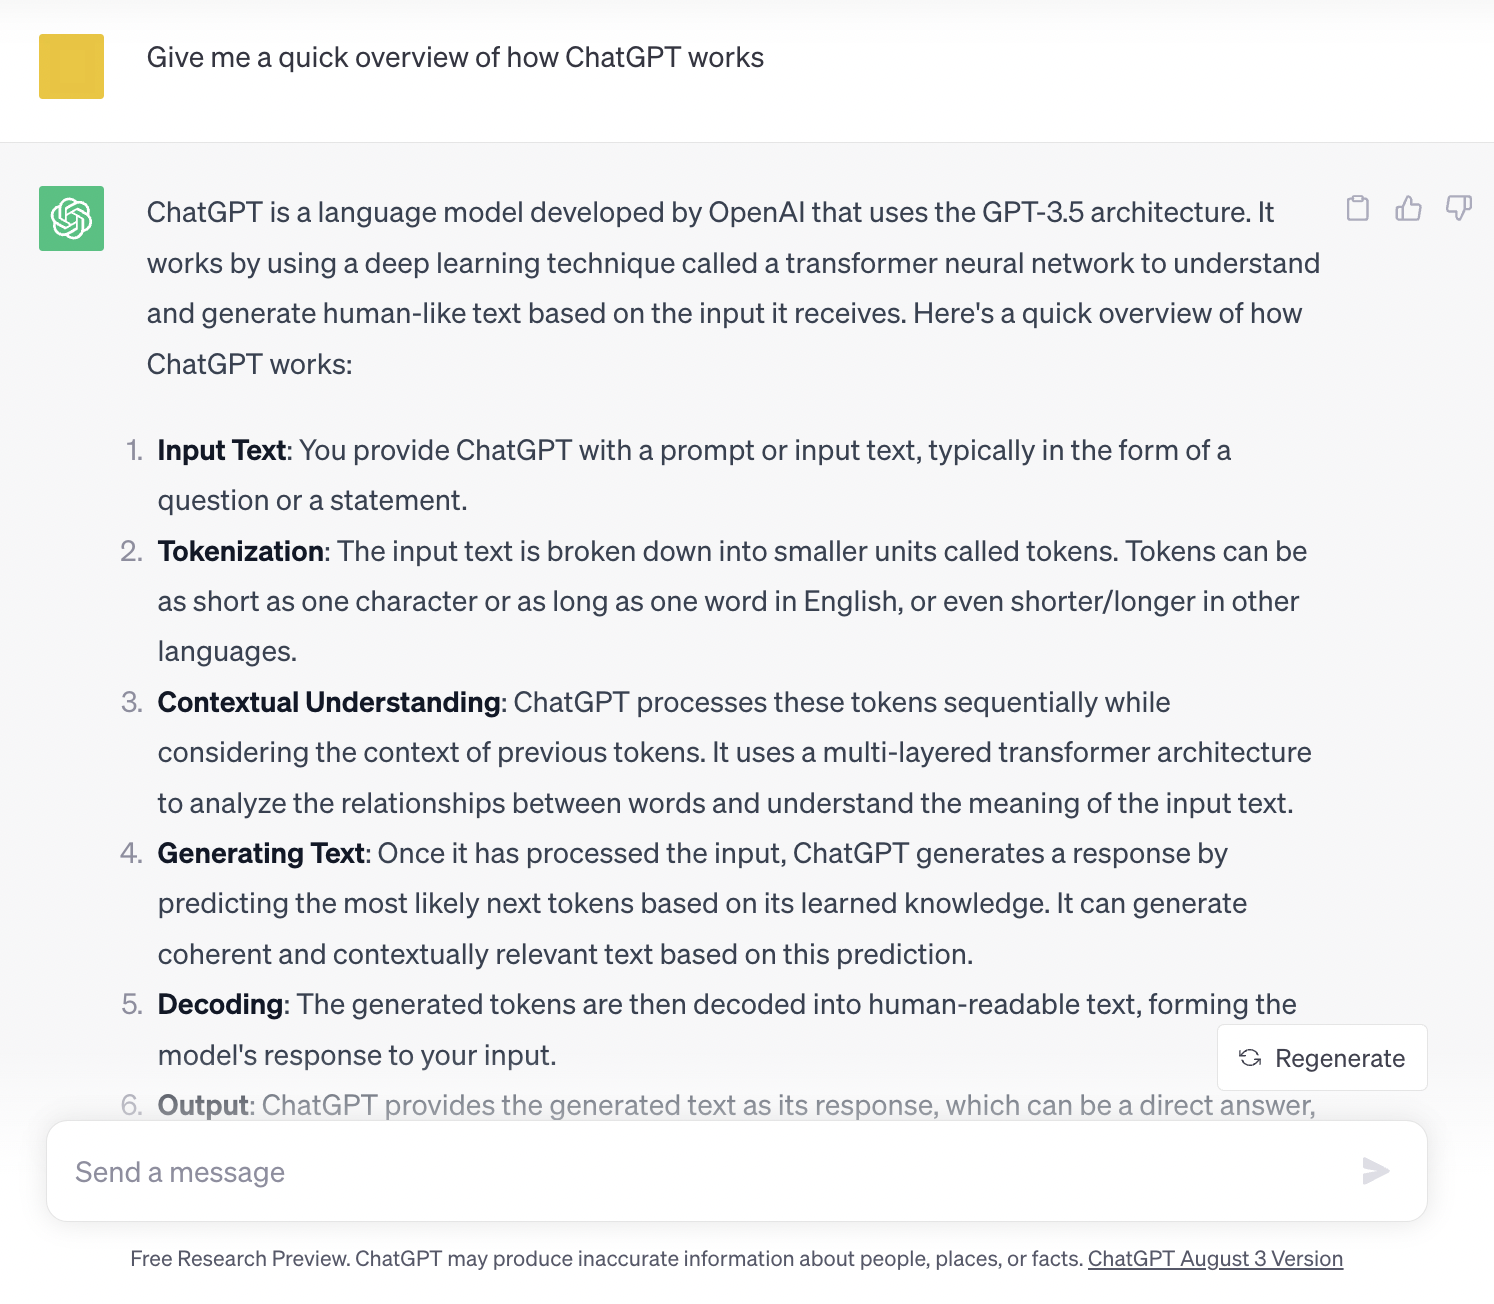 ChatGPT response to “Give me a quick overview of how ChatGPT works" prompt